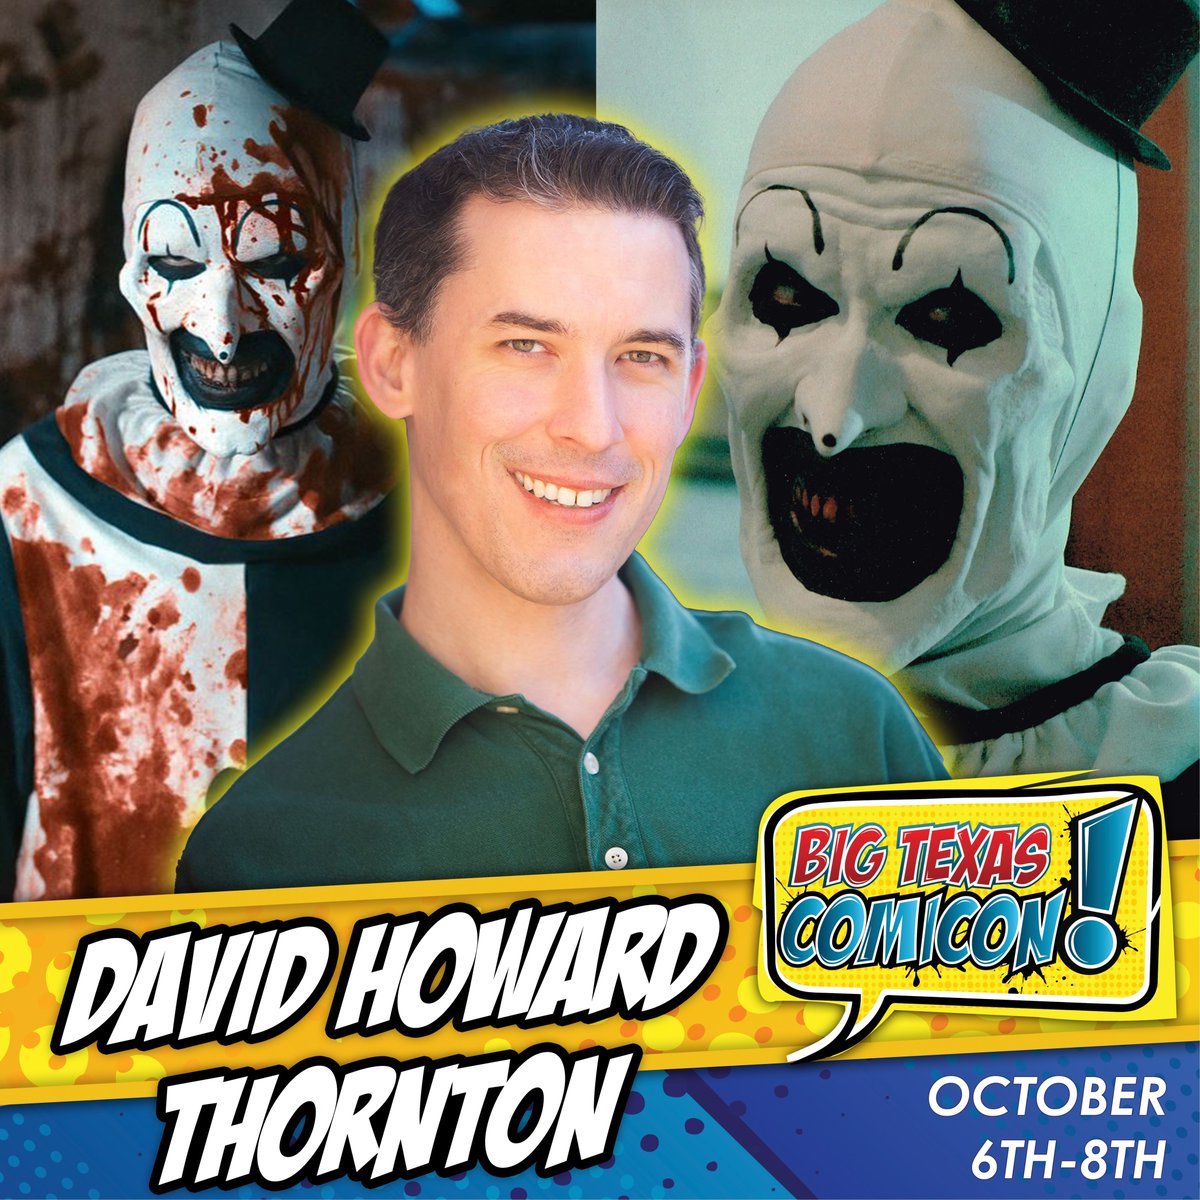 Art the Clown is coming to Big Texas Comicon!

David Howard Thornton will appear all 3 days and will have a special photo op in full Terrifier makeup Saturday only, October 7th!

This exclusive photo op goes on sale Friday at 12pm along with another Terrifier guest announcement